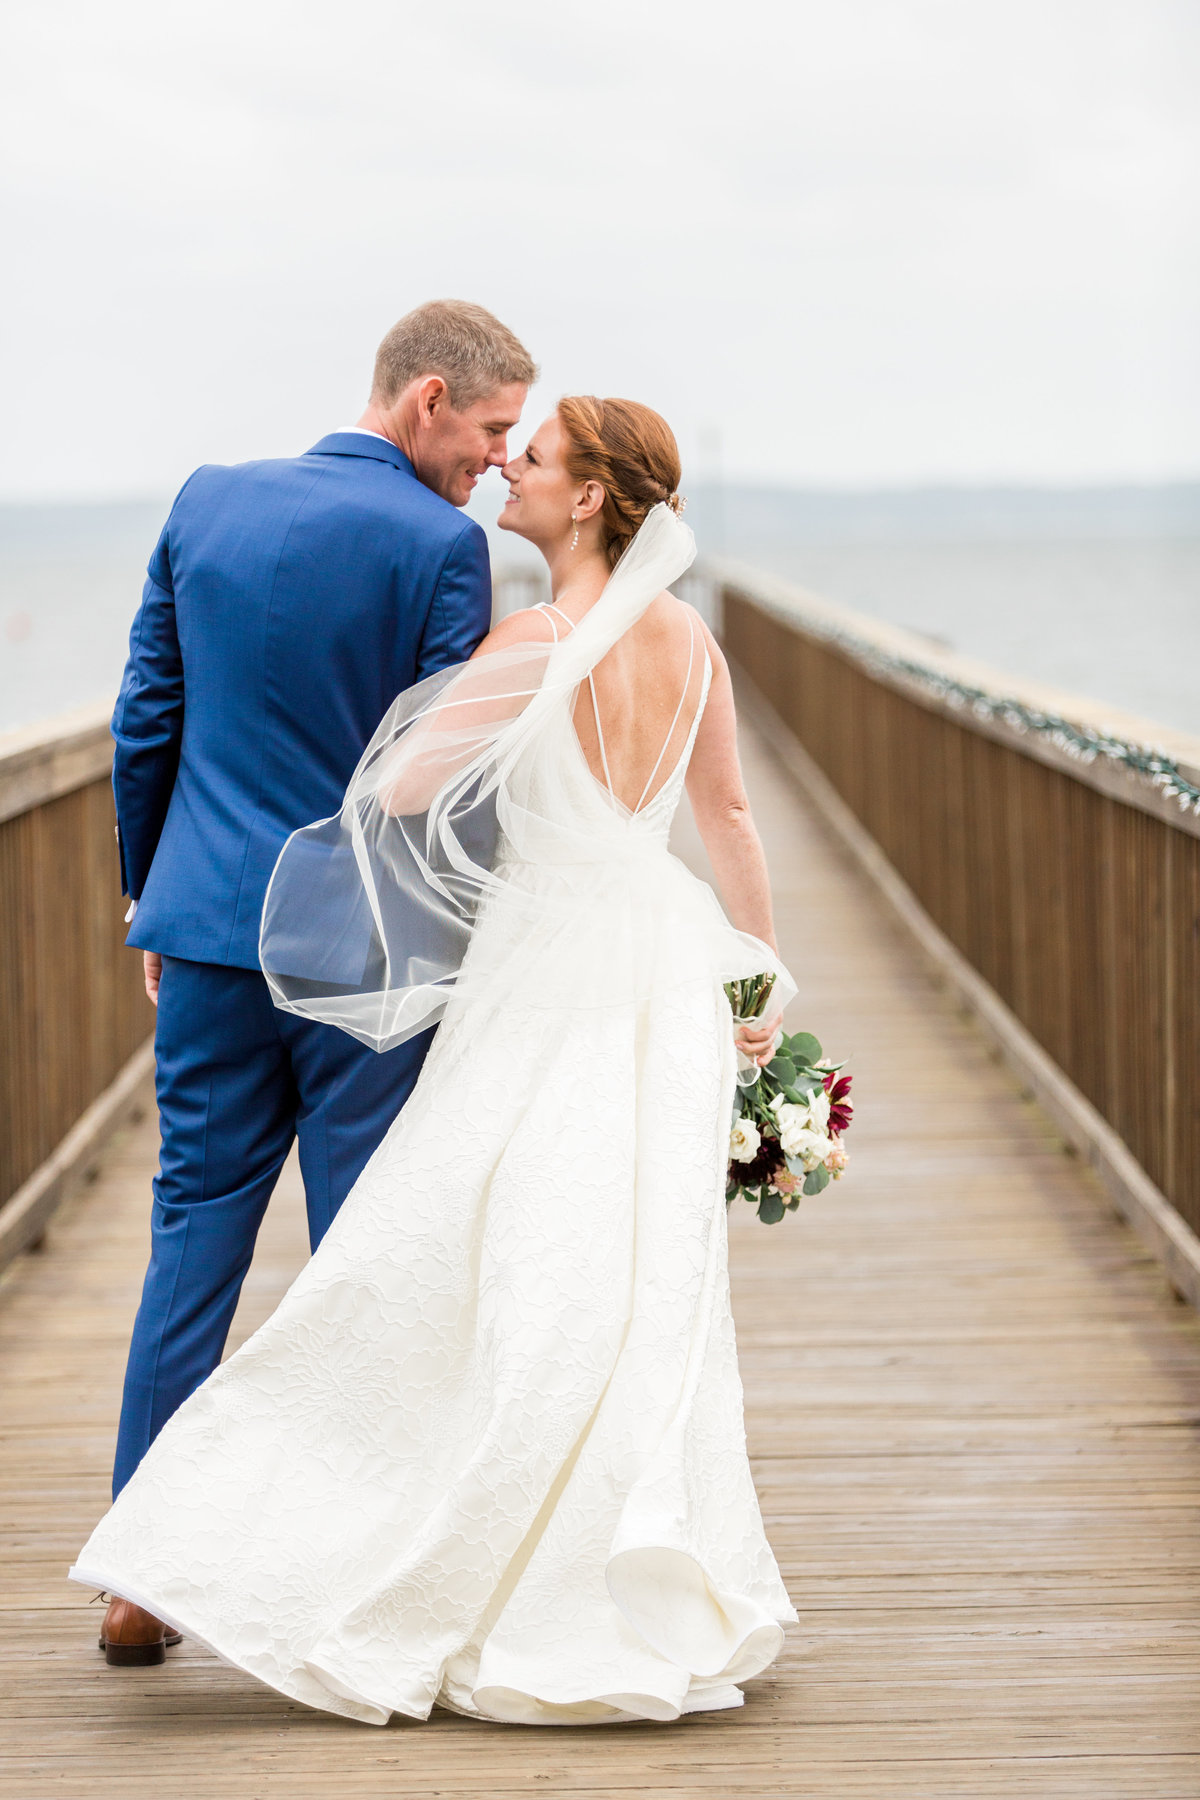 Kristina Staal Photography - Brittany & Ed Wedding - Coveleigh Club Rye NY Sep 14 2019-176